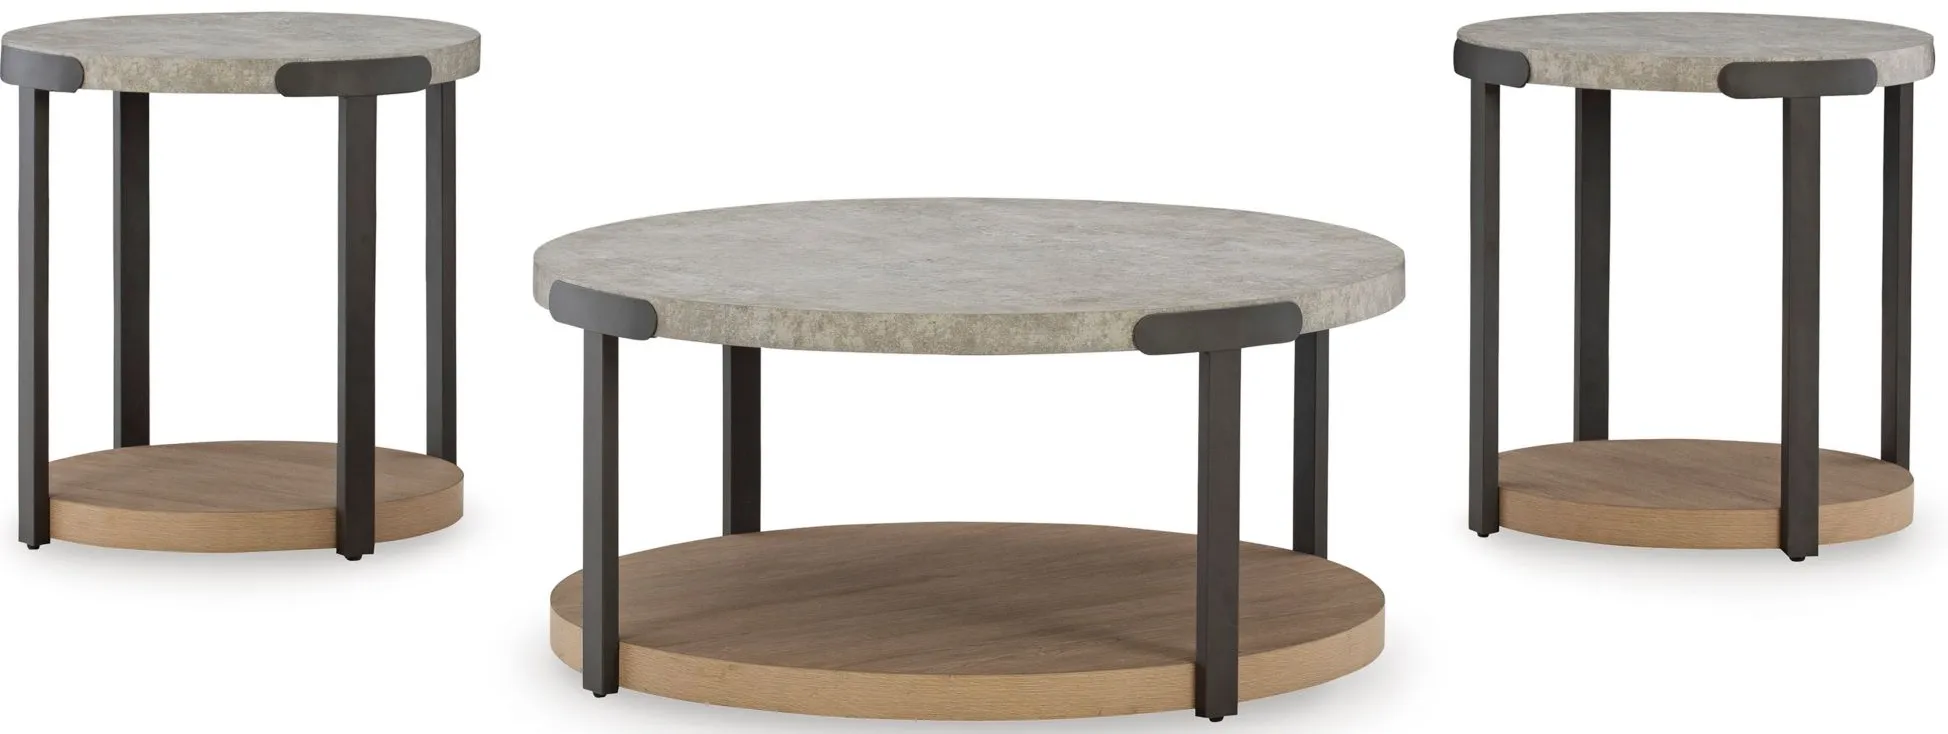 Darthurst 3-pc. Occasional Tables W/ Casters in Light Brown by Ashley Furniture